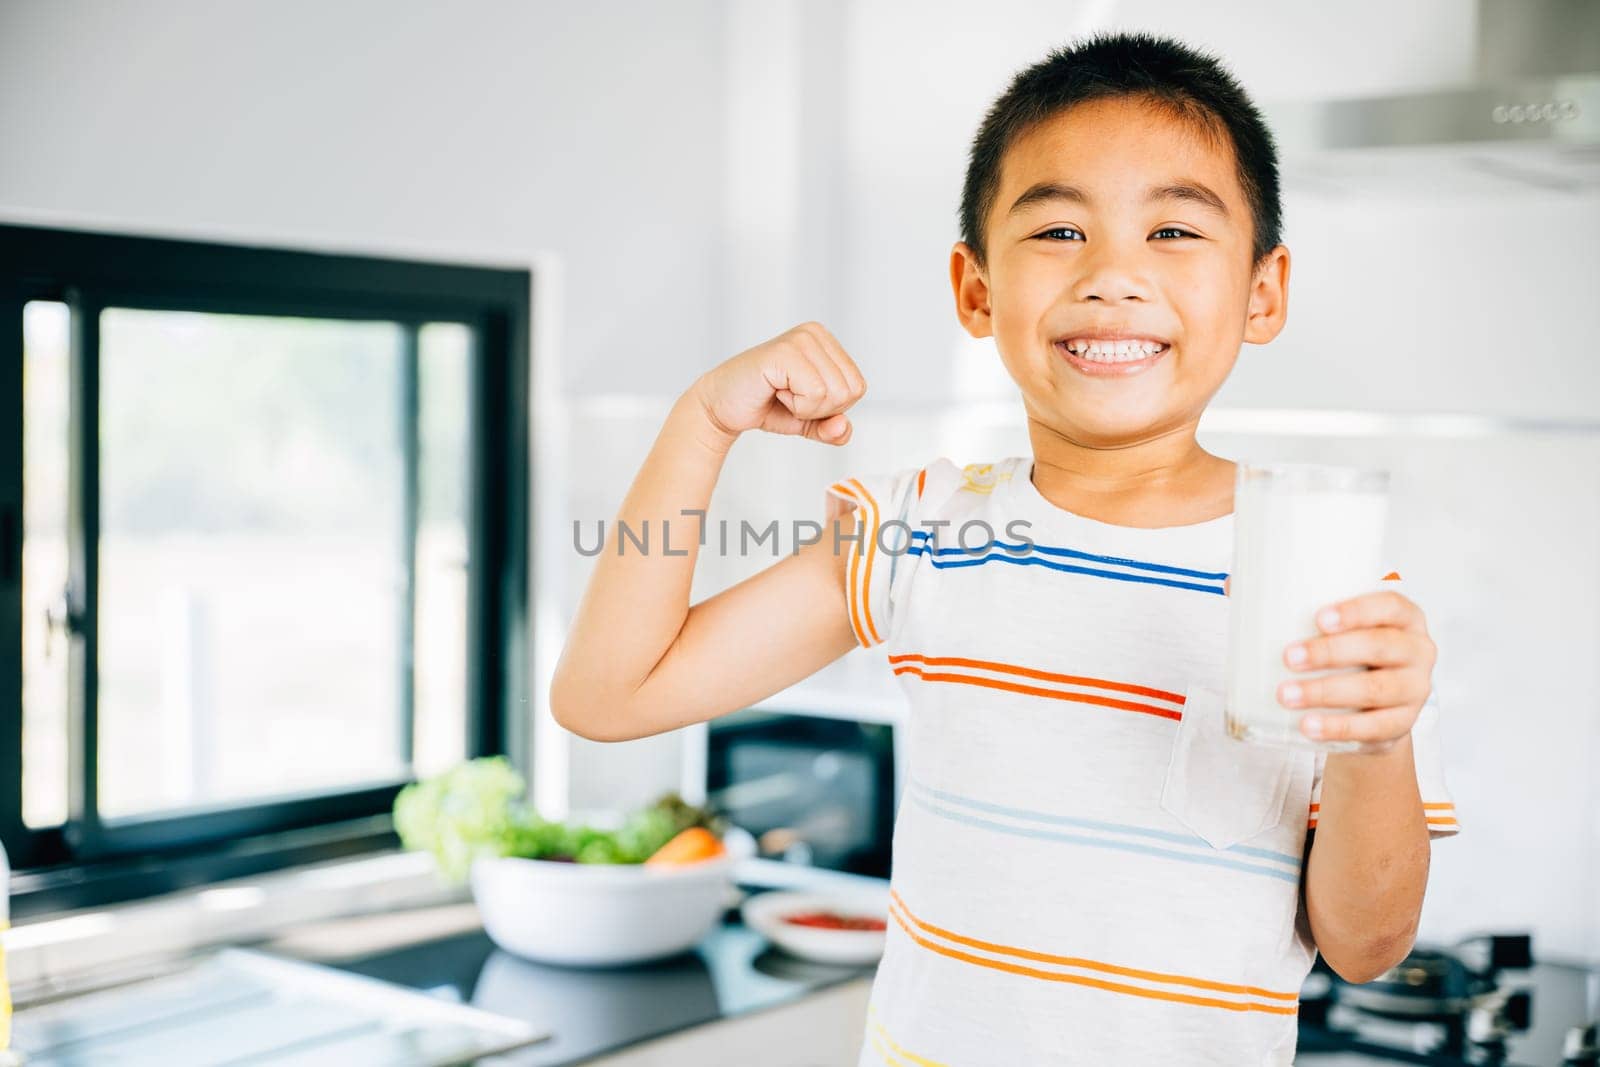 Happy Asian little boy in kitchen holds milk cup, smiling. Portrait of cute son enjoying the drink. Joyful child sips calcium-rich liquid, radiating happiness at home give me. by Sorapop